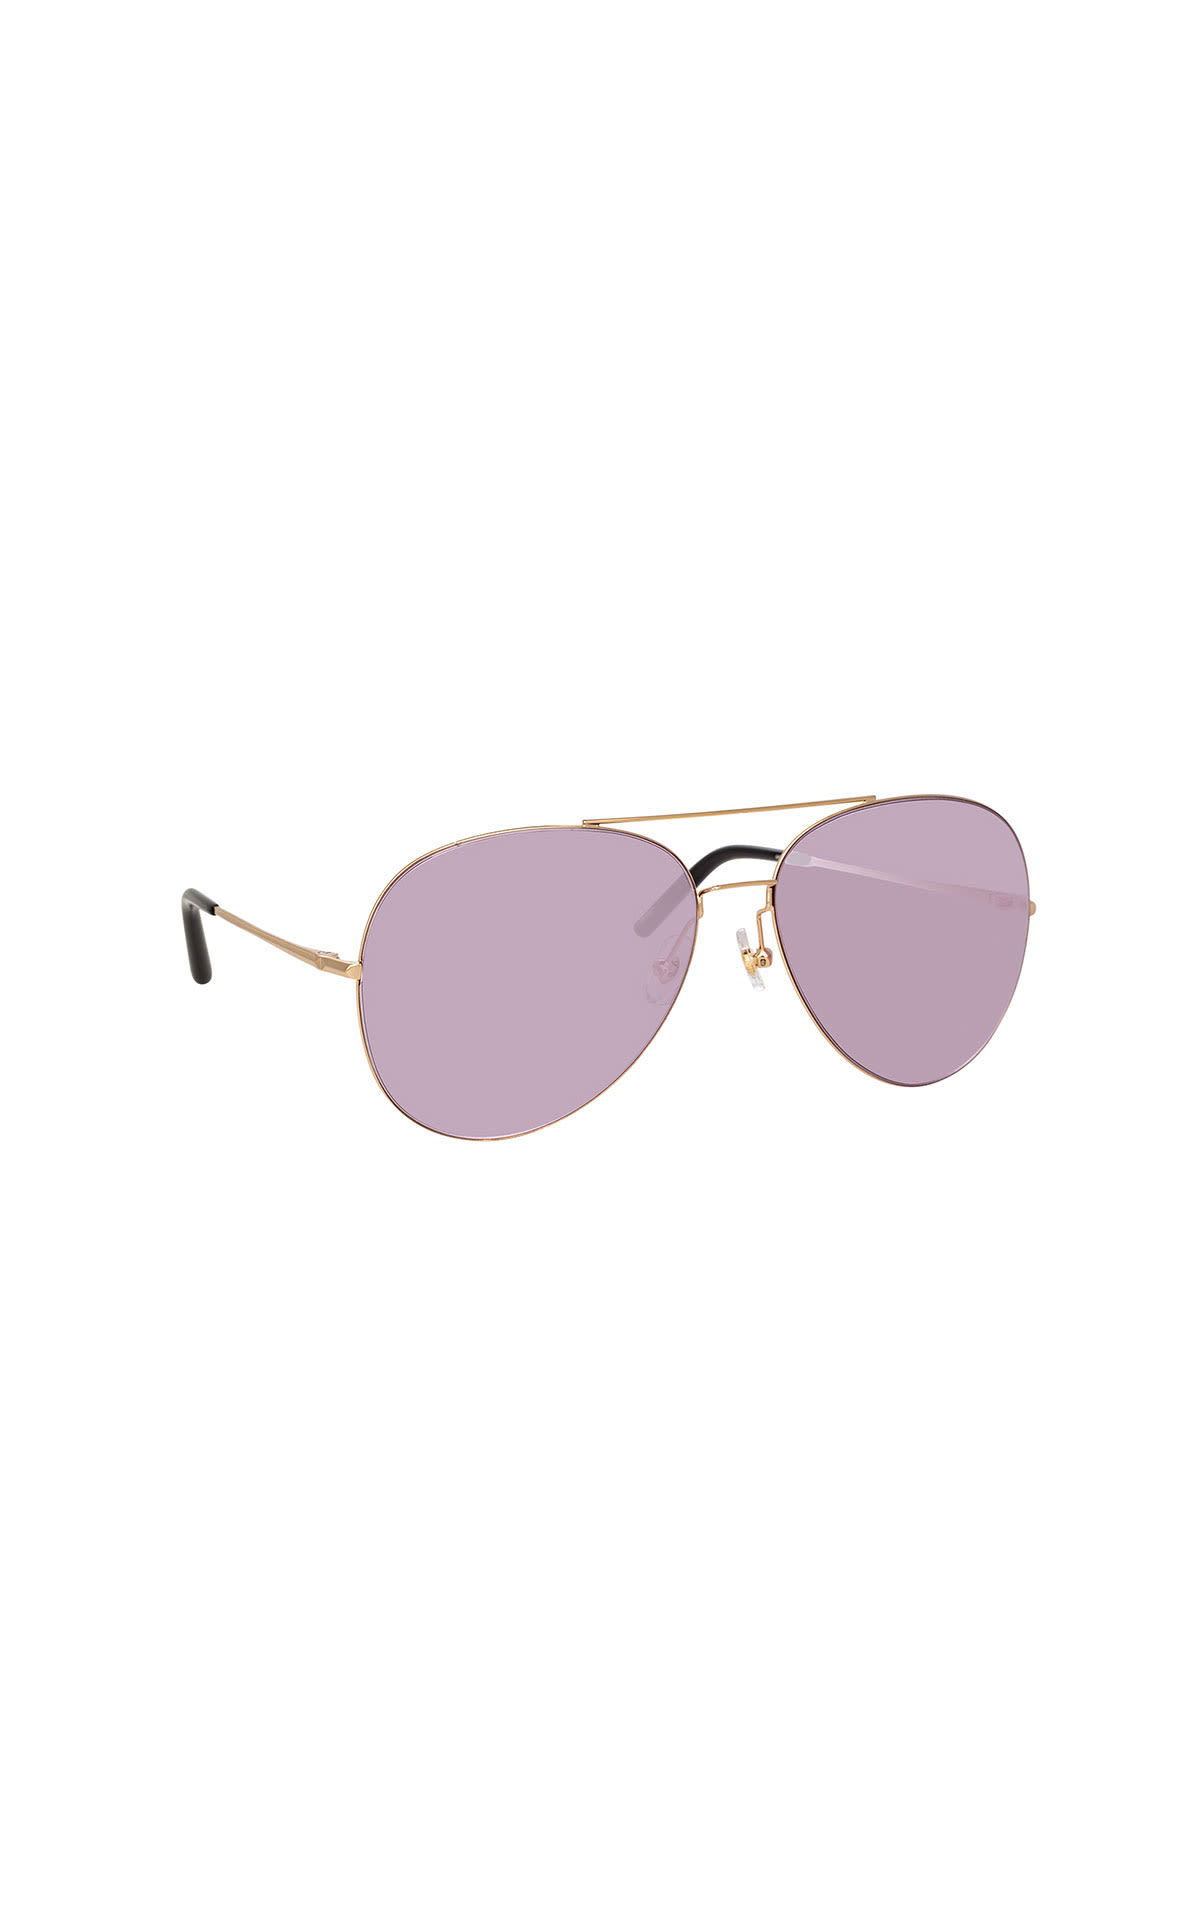 Linda Farrow Sun light gold and purple from Bicester Village